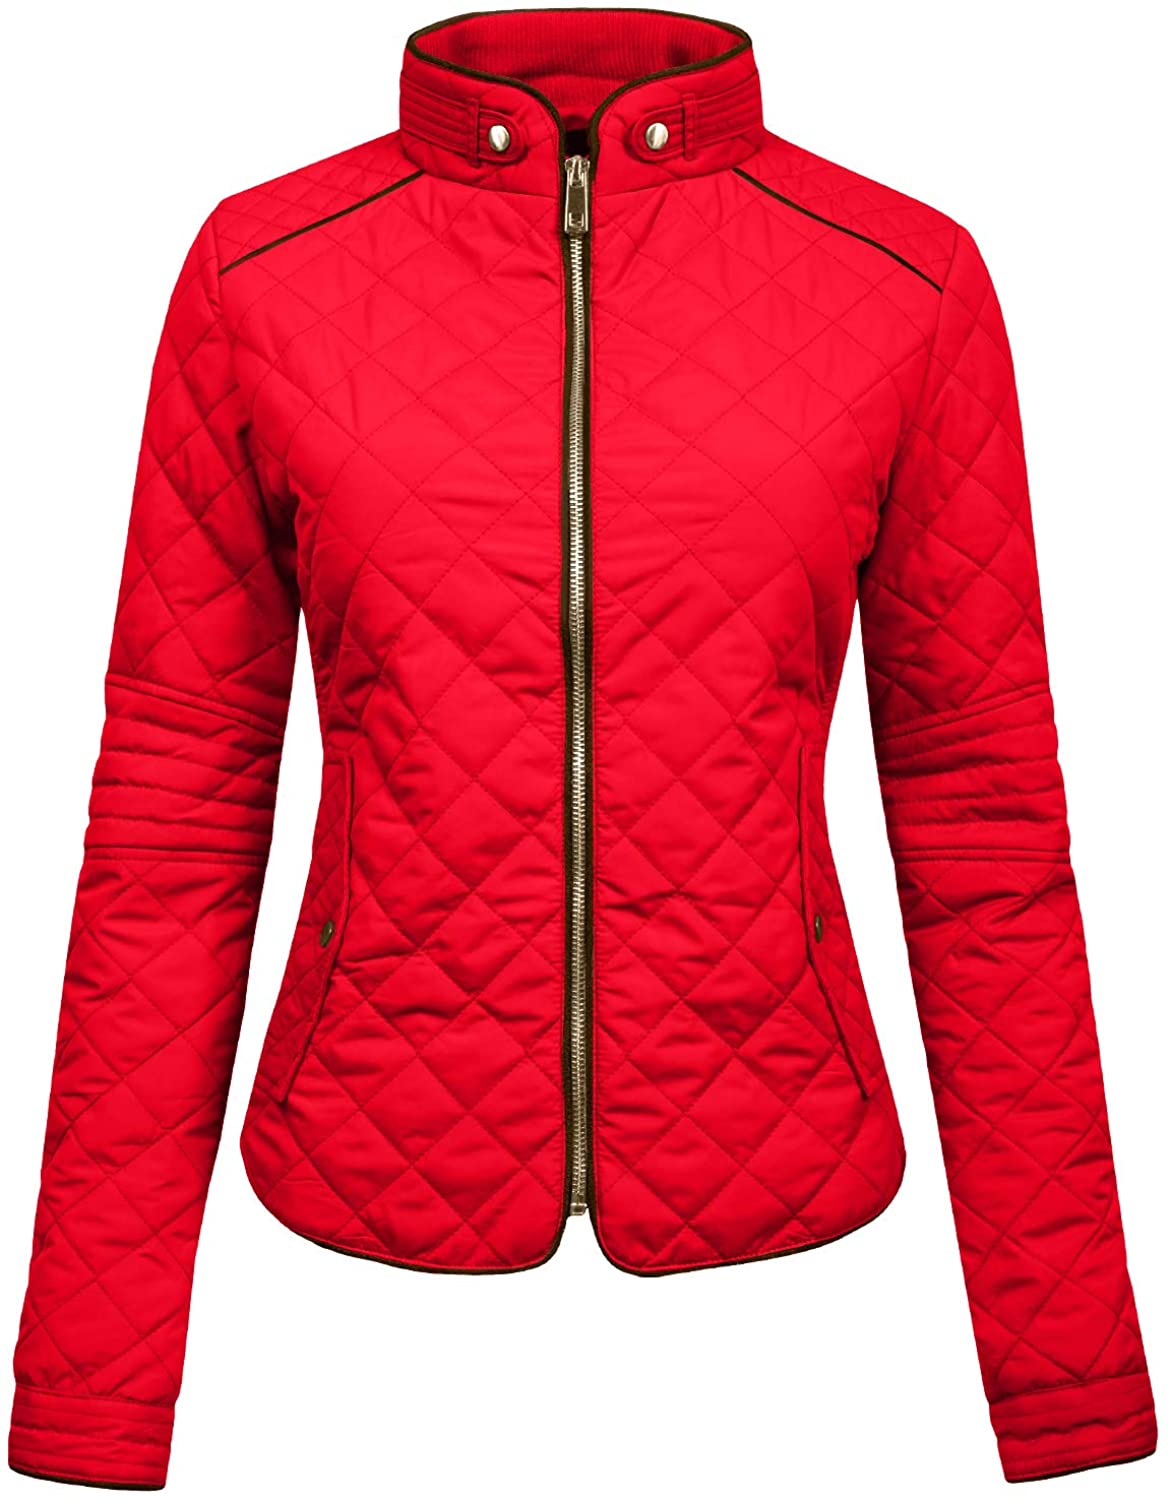 NE PEOPLE Womens Light Weight Long Sleeve Quilted Zip Up Jacket with Hood NEWJ65 